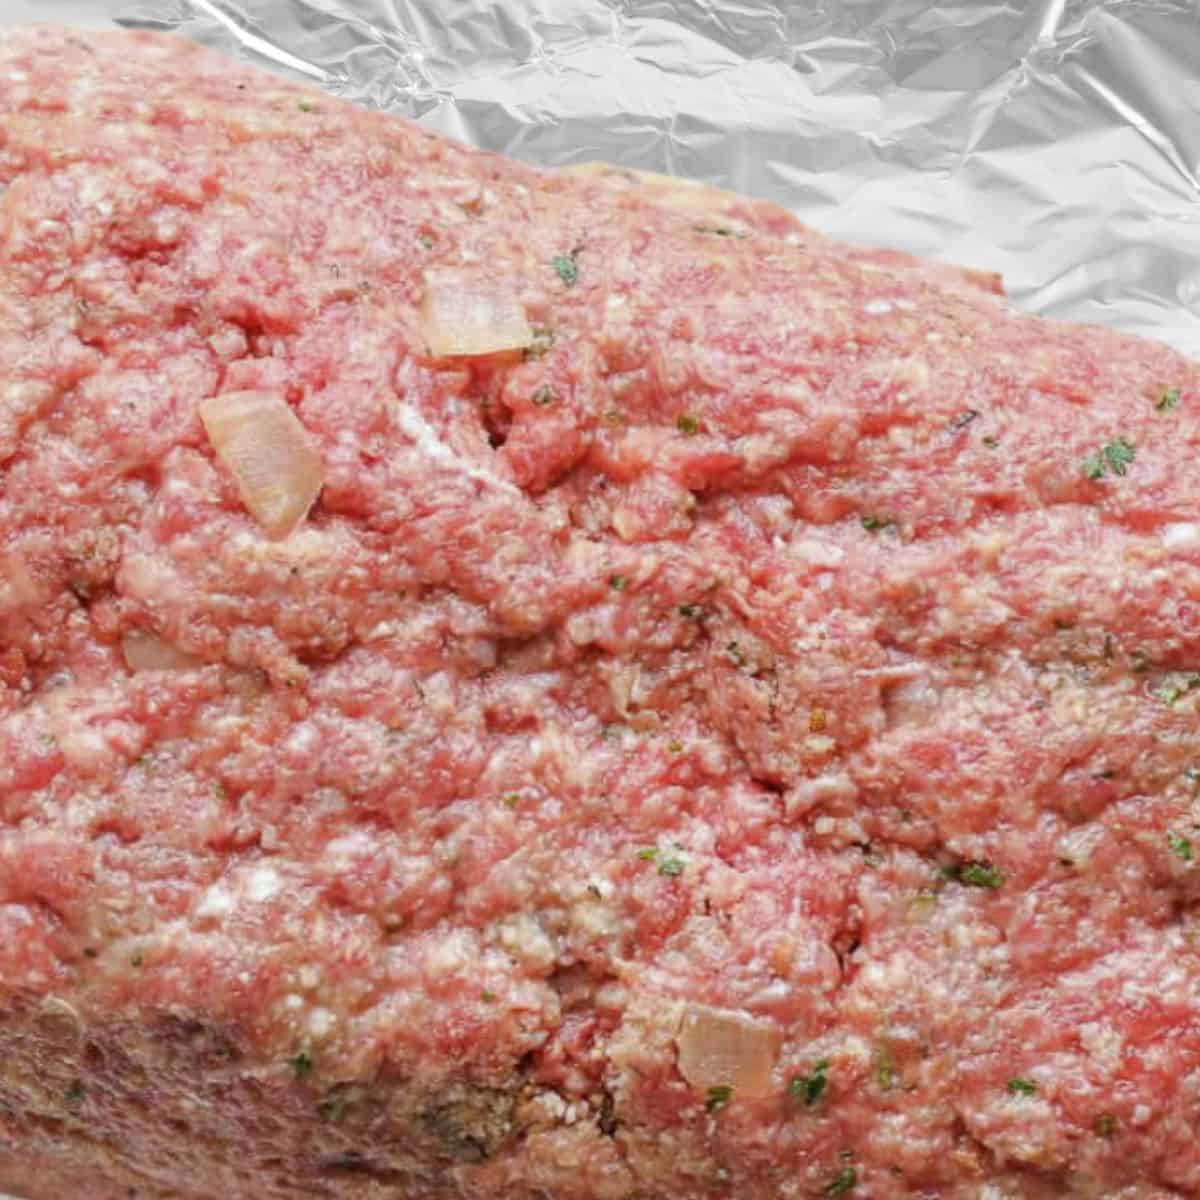 uncooked meatloaf ready for the oven